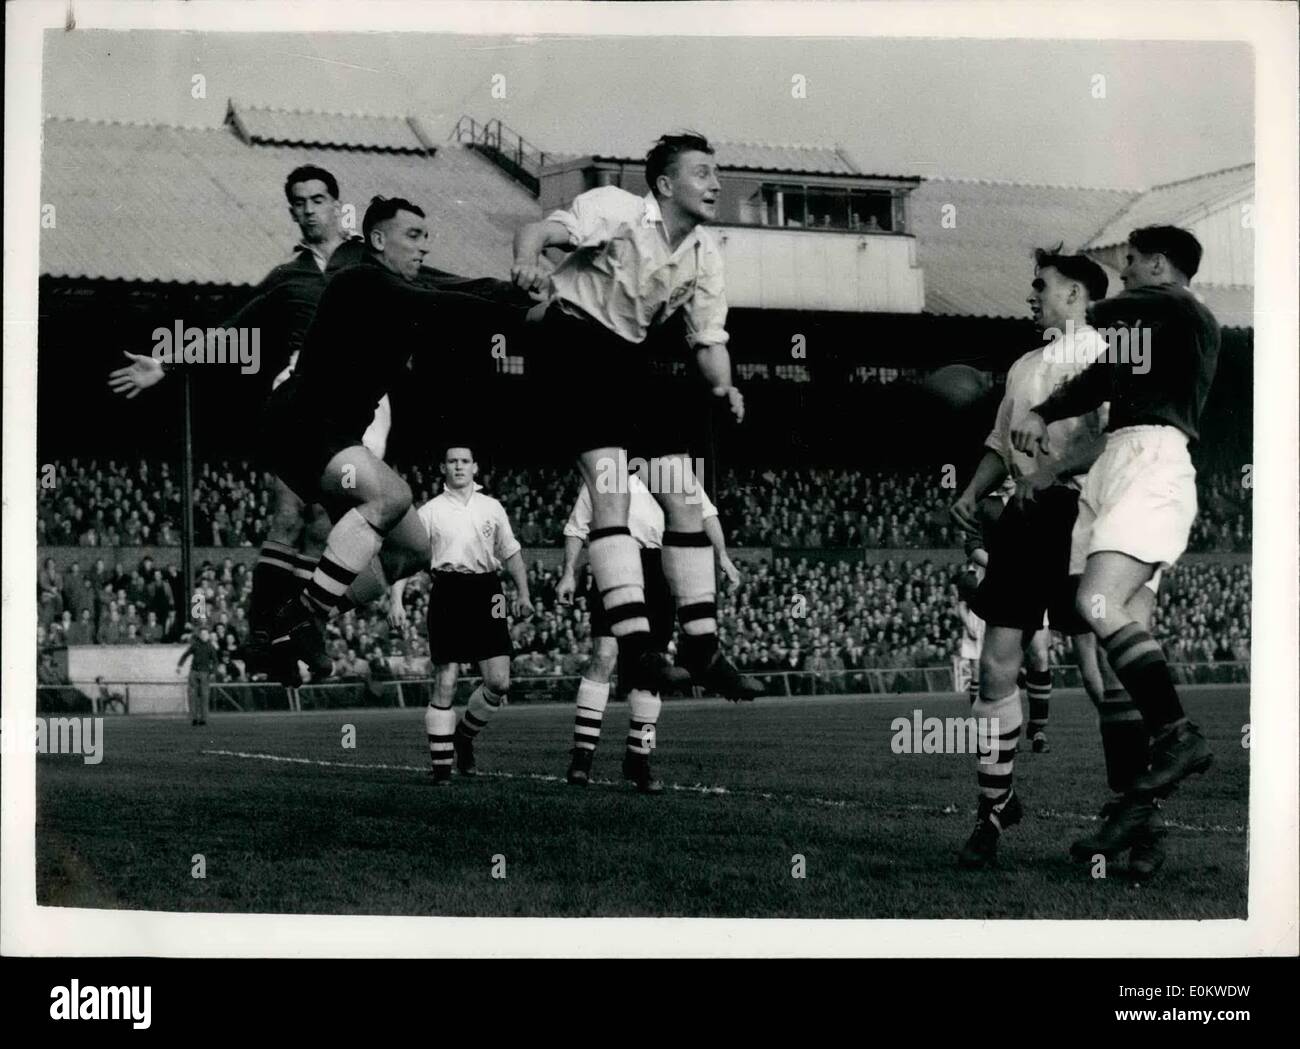 Oct. 10, 1951 - Chelsea versus Bolton Wanderers.. Photo shows Hanson the Bolton Goealkeeper makes a save - during the Chelsea versus Bolton Wanderers Match at Stanford bridge this afternoon. Stock Photo